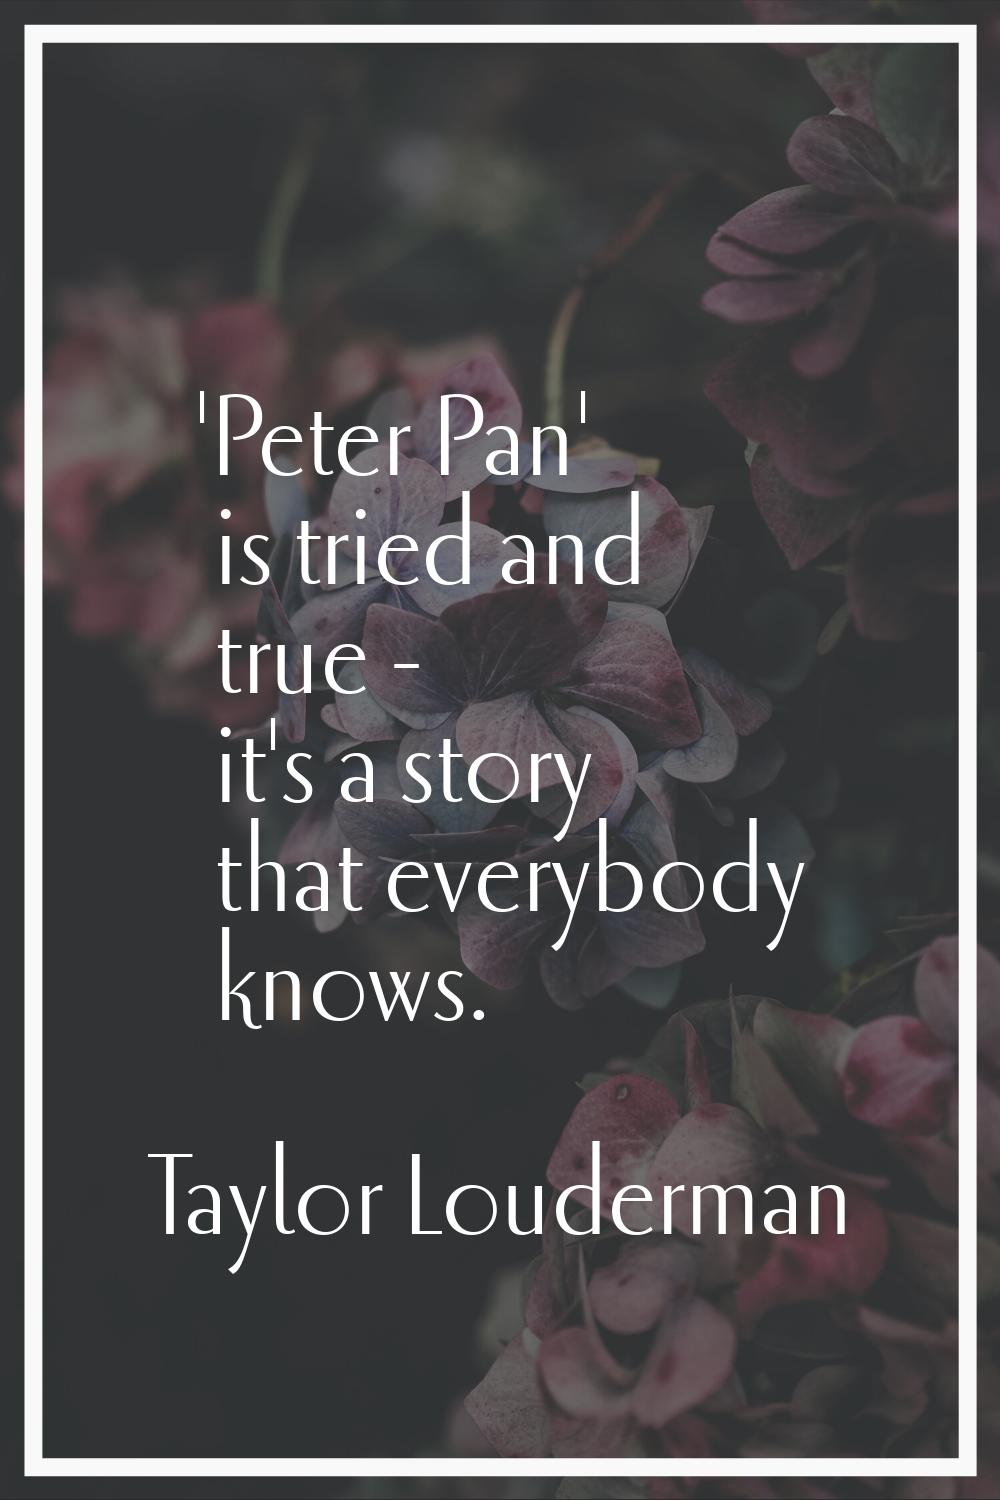 'Peter Pan' is tried and true - it's a story that everybody knows.